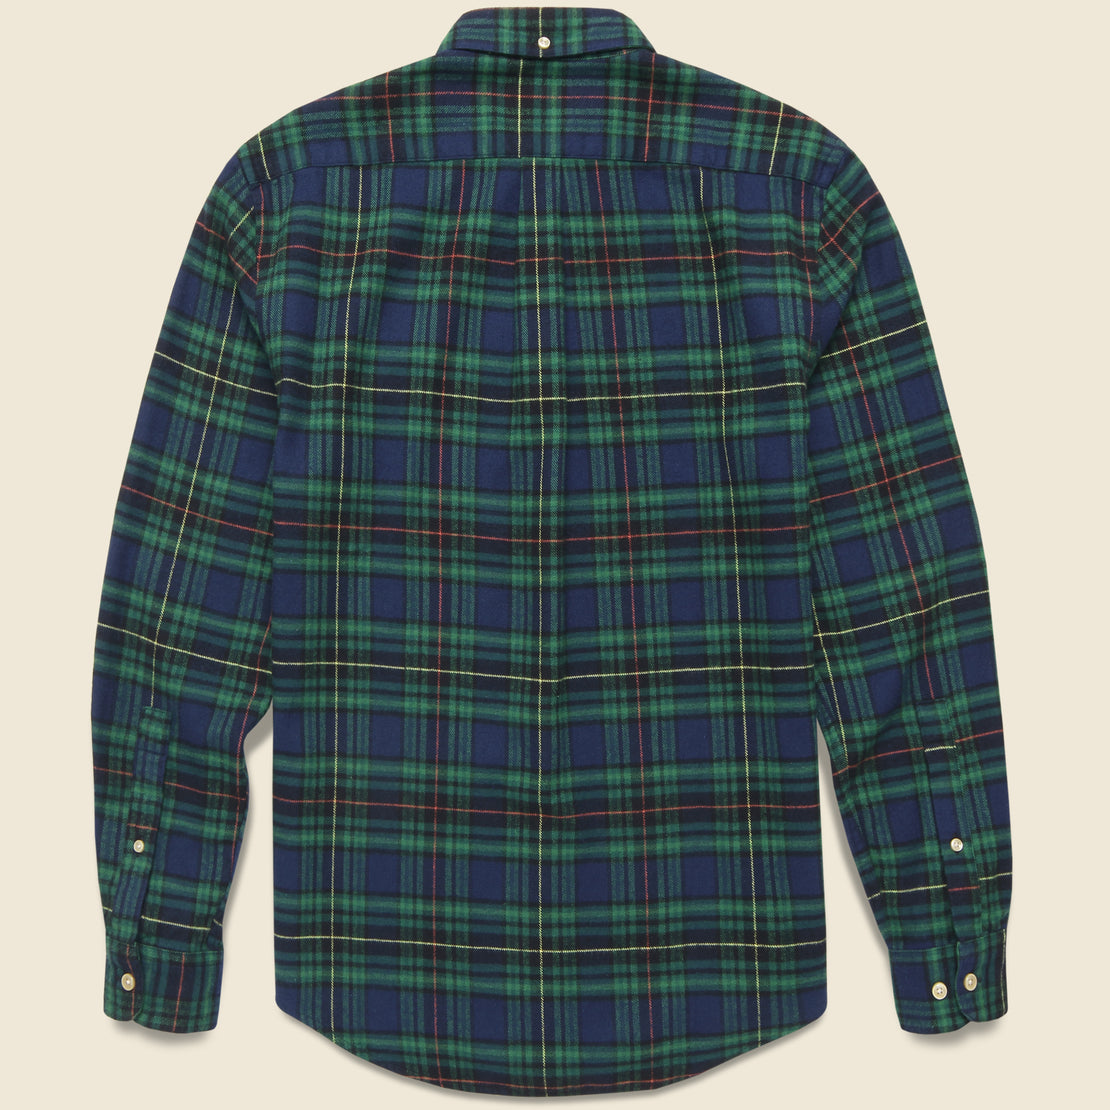 Orts Shirt - Green - Portuguese Flannel - STAG Provisions - Tops - L/S Woven - Plaid